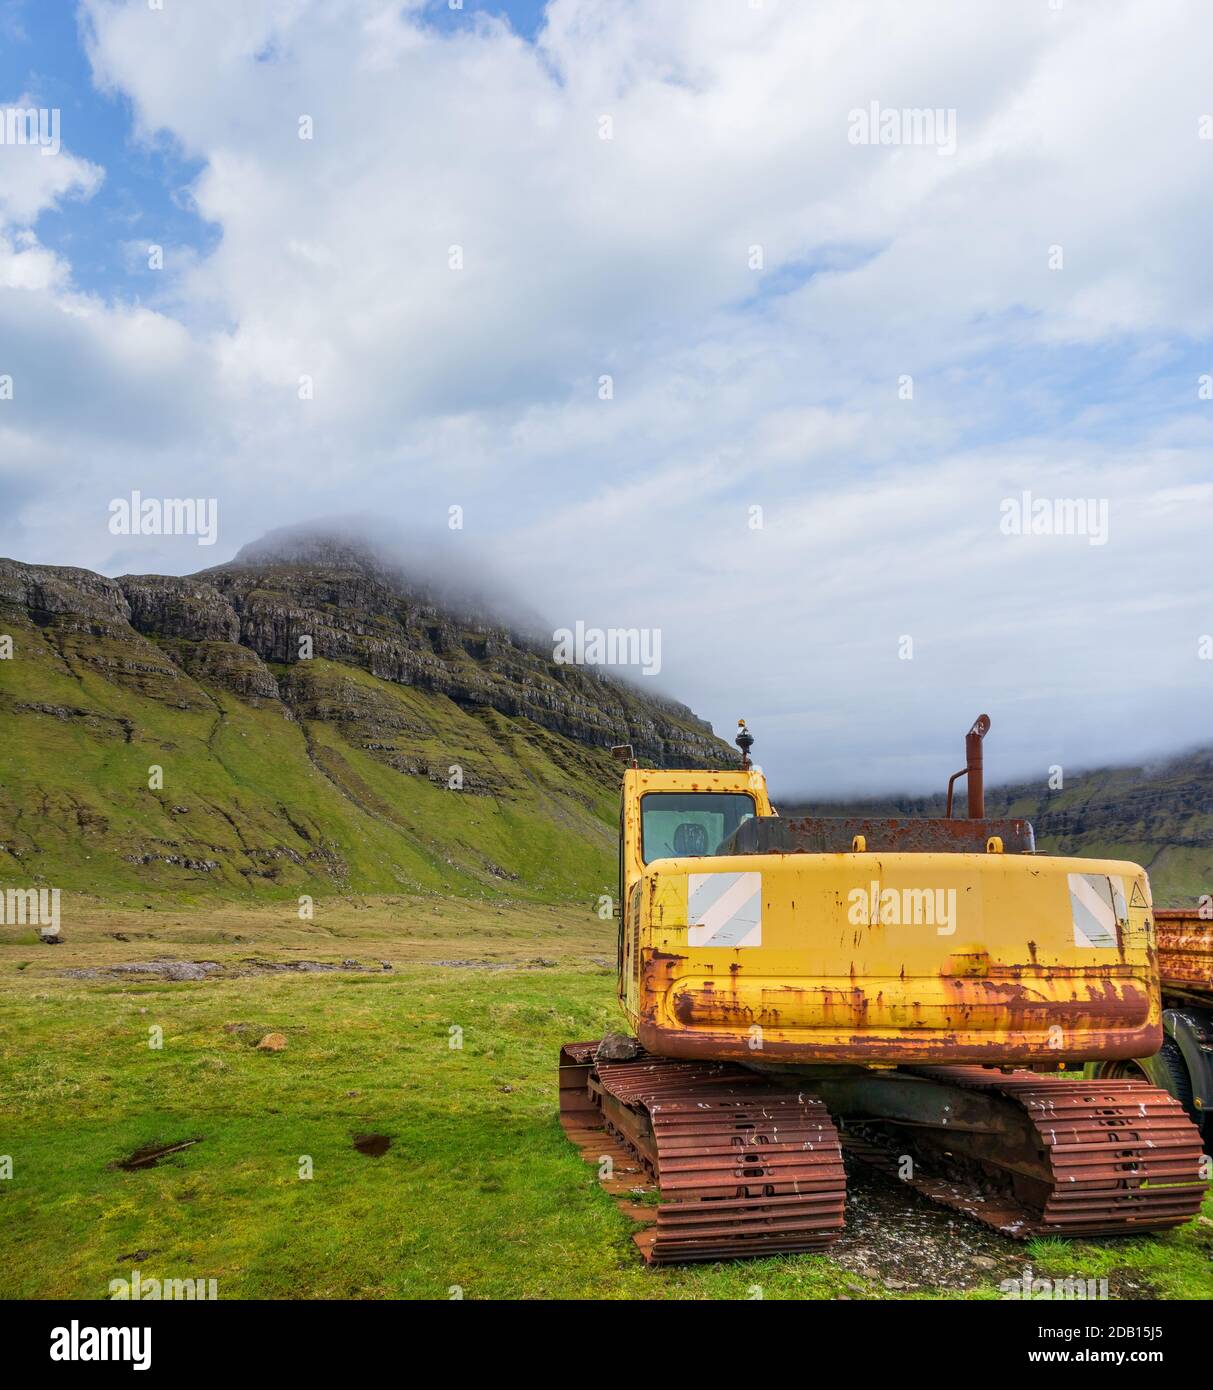 Old ruined excavator abandoned near the mountains Stock Photo